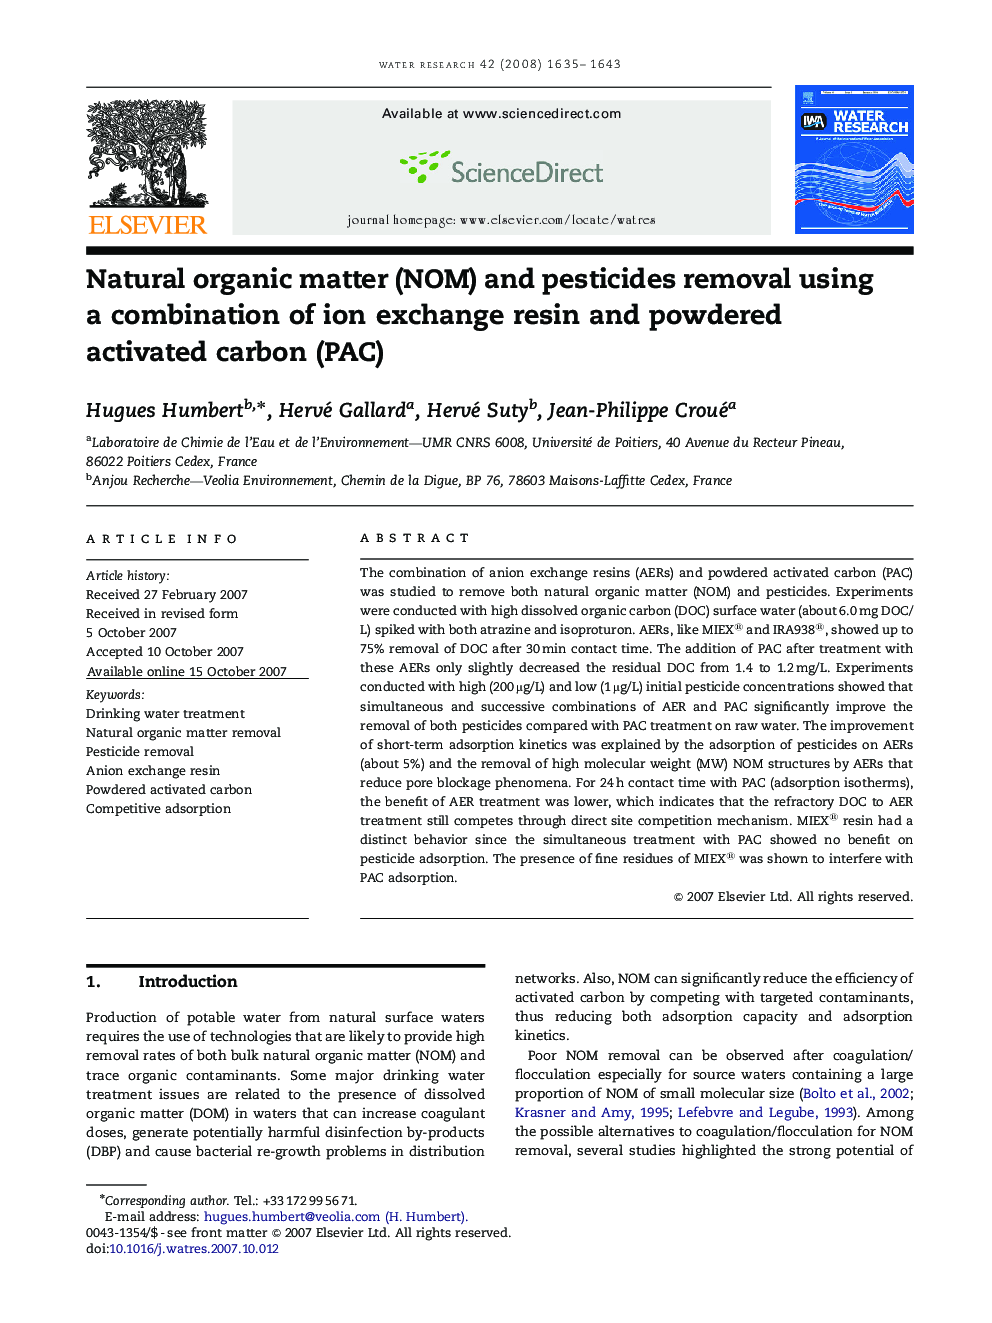 Natural organic matter (NOM) and pesticides removal using a combination of ion exchange resin and powdered activated carbon (PAC)